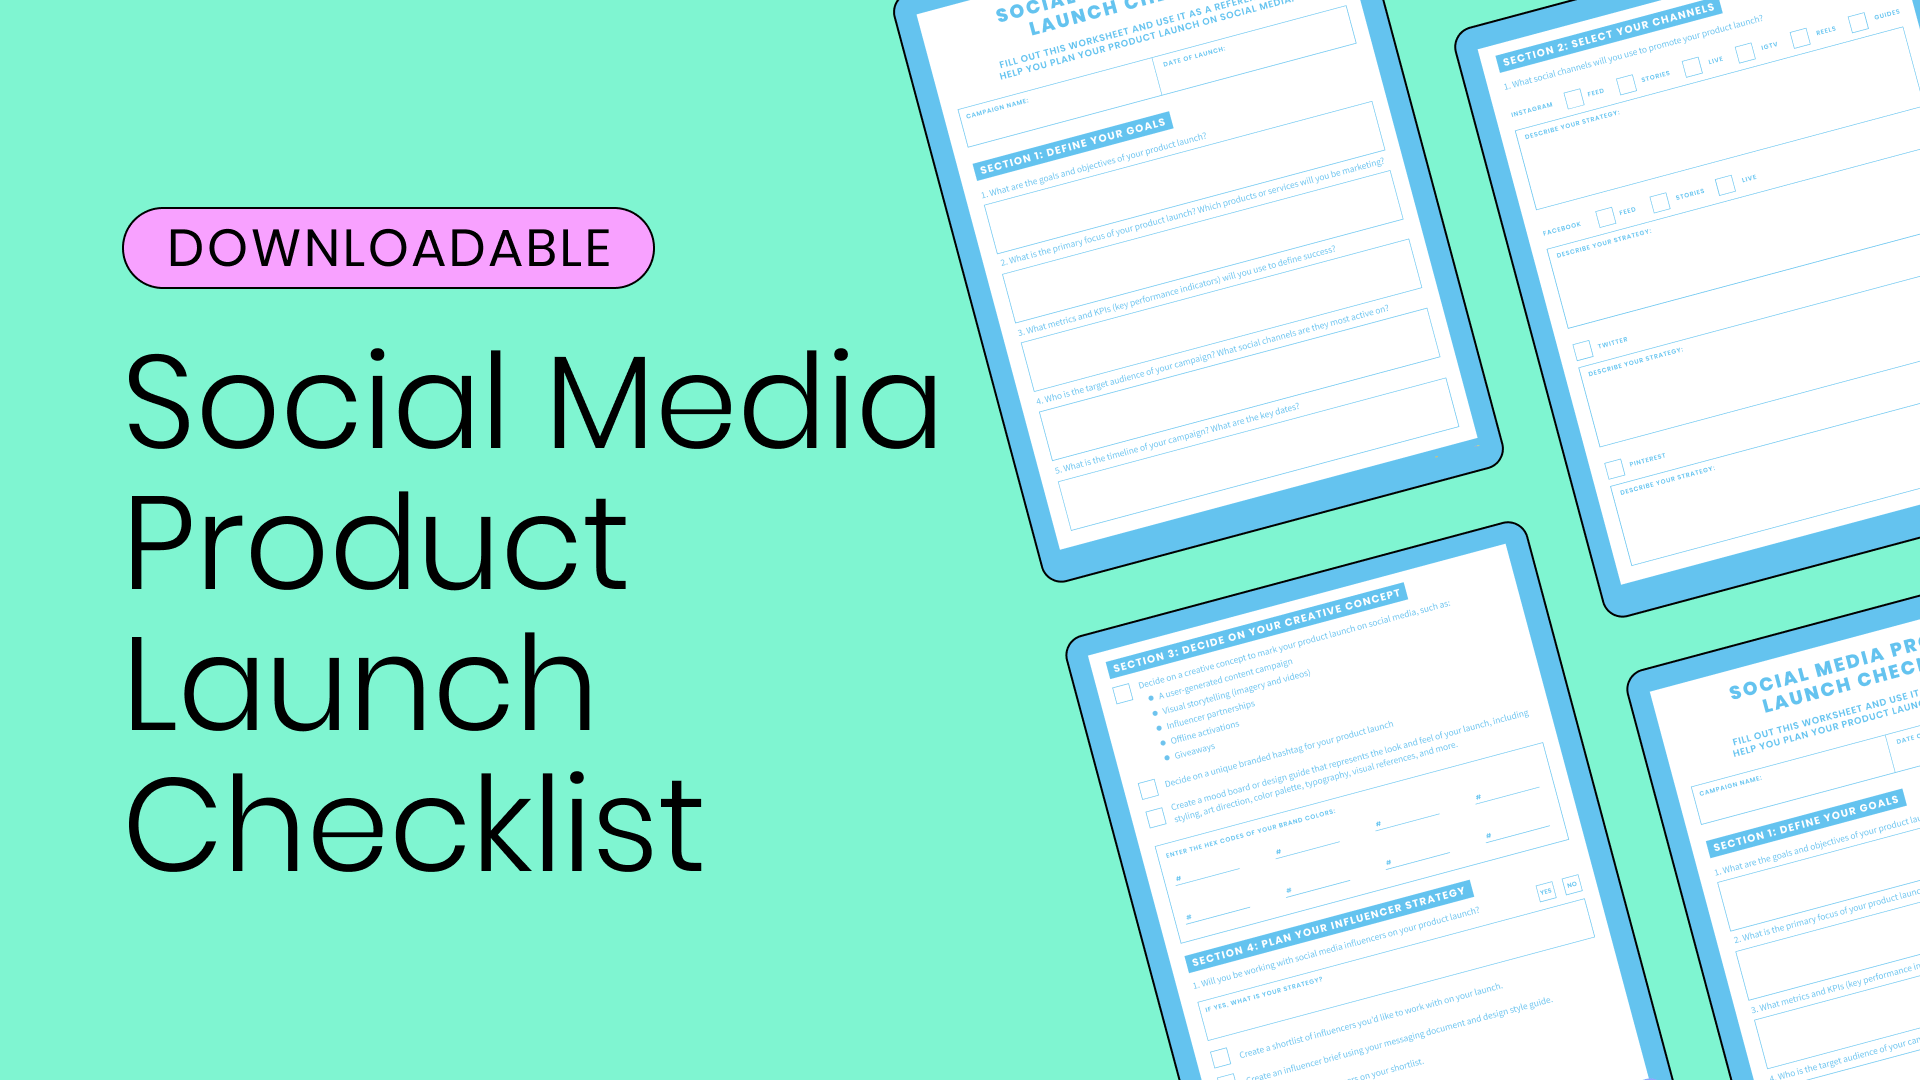 Thumbnail image reading Downloadable Social Media Product Launch Checklist with graphic of checklist